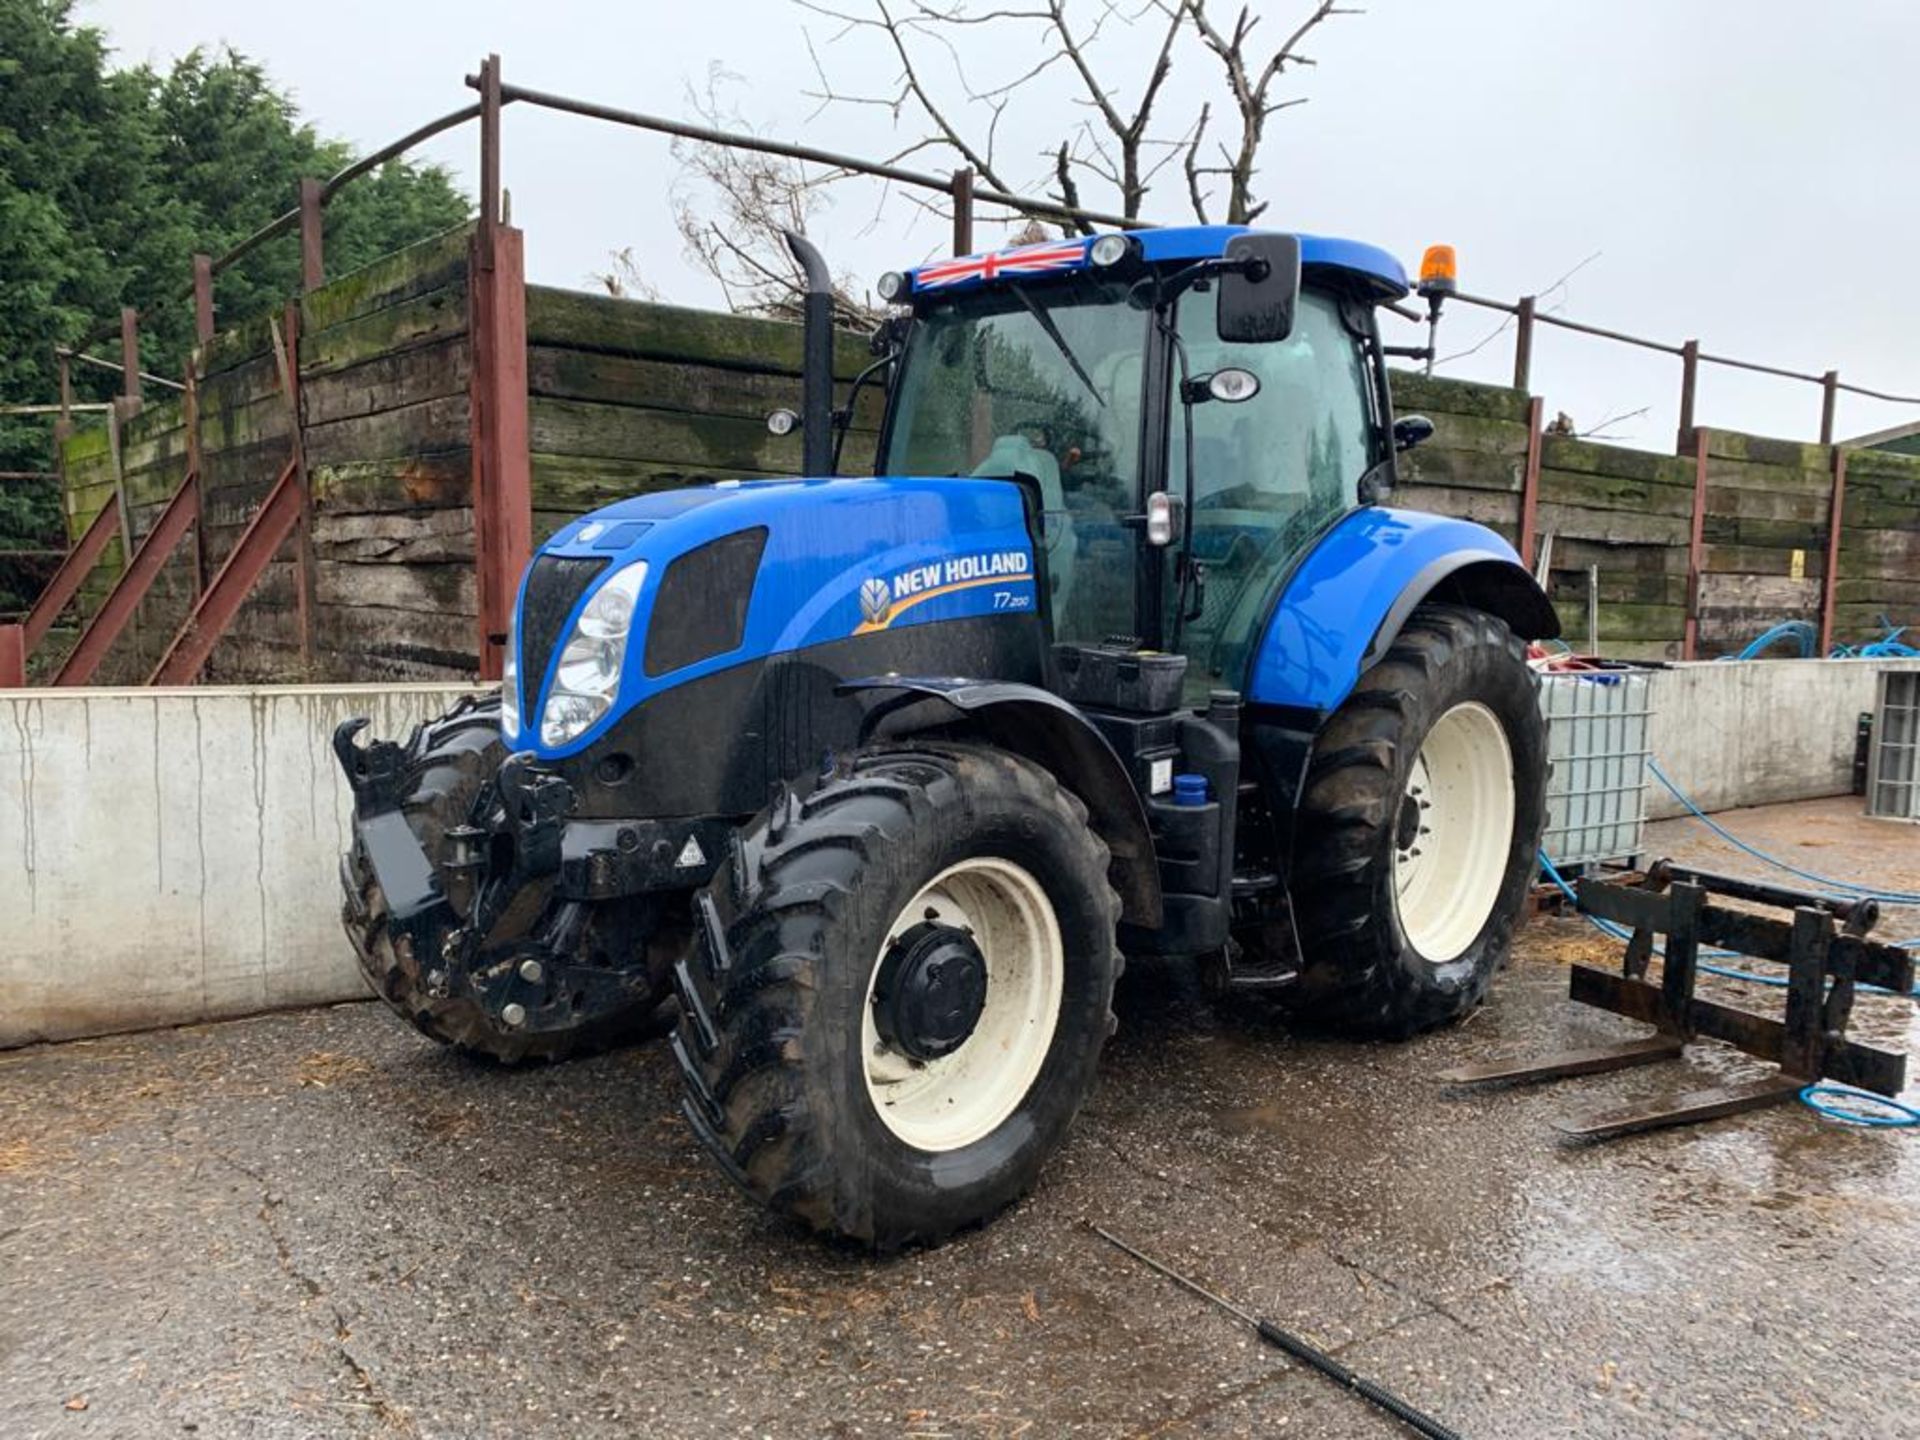 2013/63 REG NEW HOLLAND T7.200 TRACTOR, SHOWING 1 FORMER KEEPER, RUNS AND WORKS AS IT SHOULD. - Bild 3 aus 16